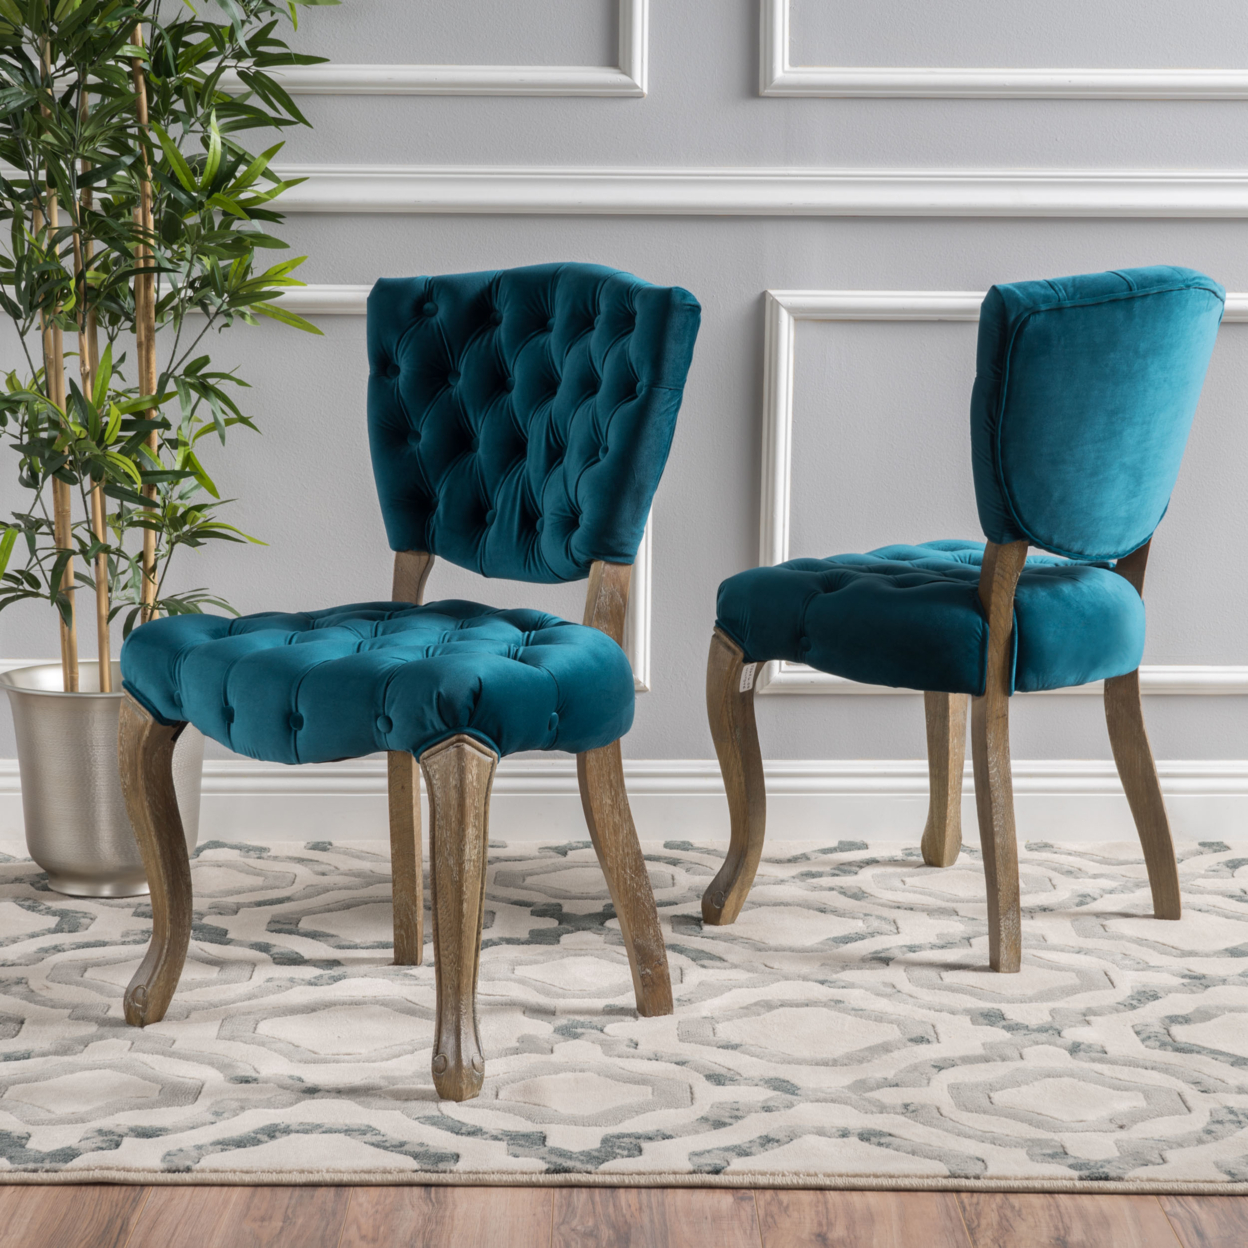 Bates Tufted Velvet Dining Chair With Cabriole Legs (Set Of 2) - Dark Teal Fabric